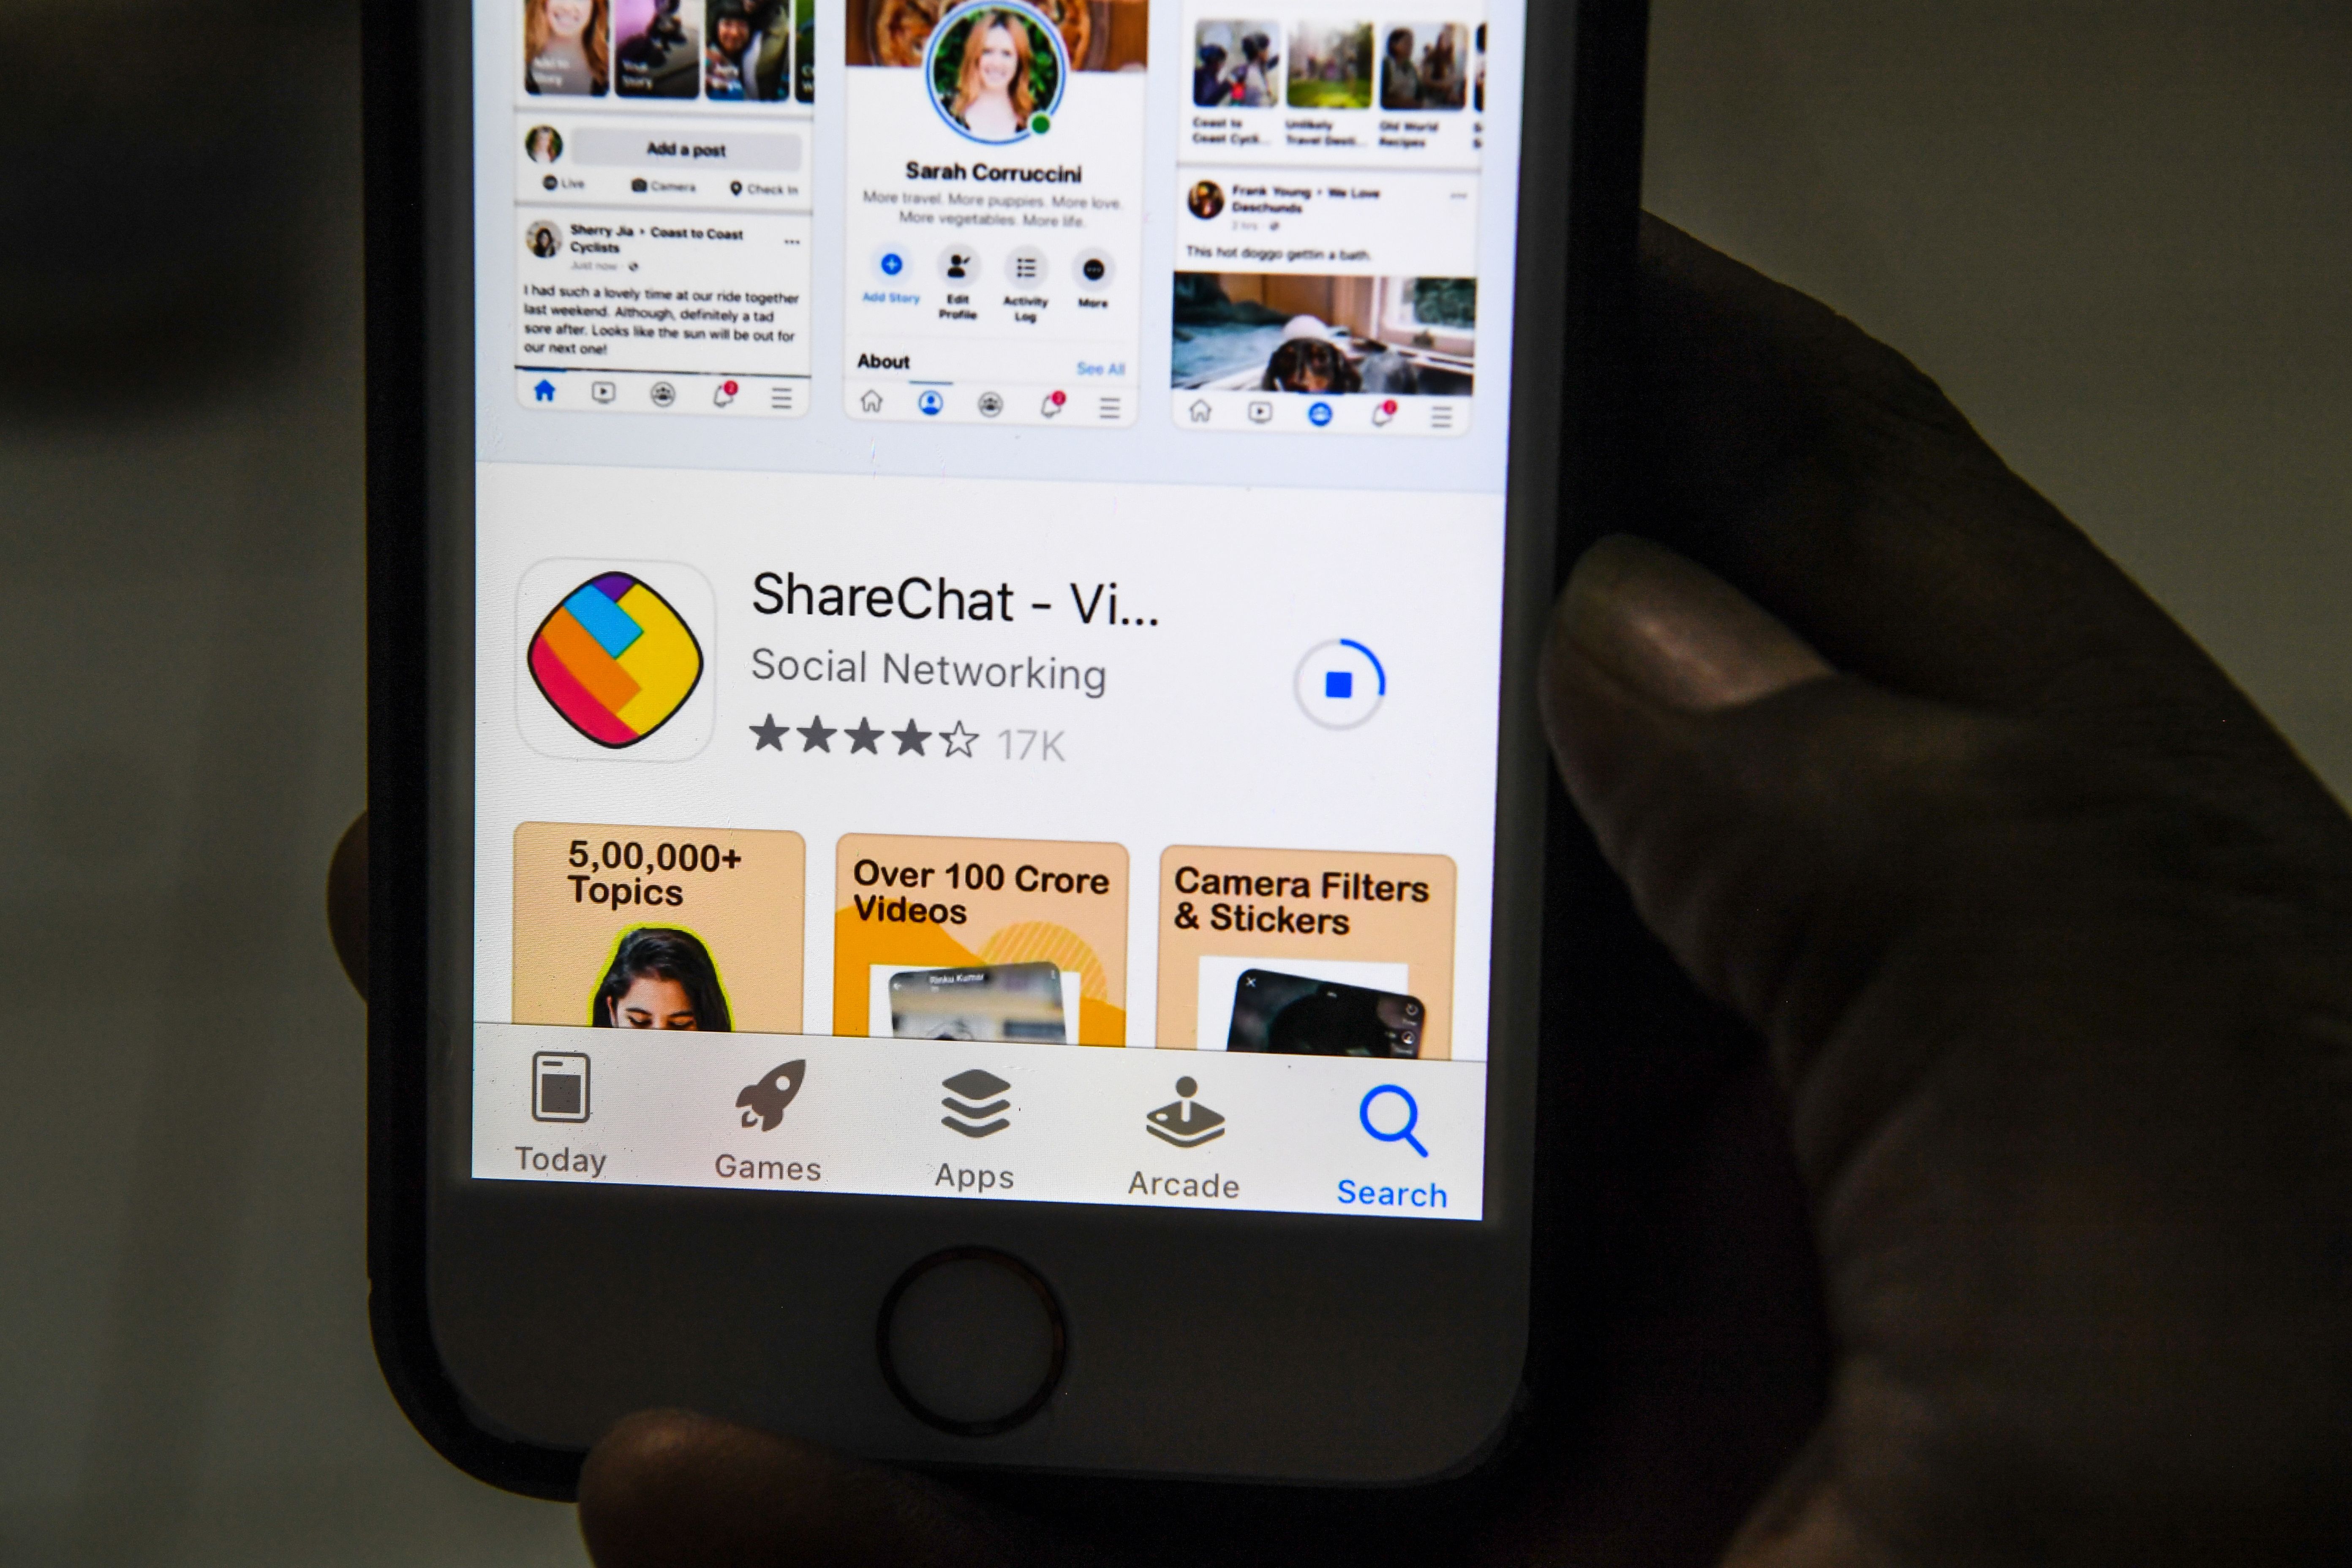 Google-backed ShareChat cuts 20% workforce to ‘sustain through headwinds’